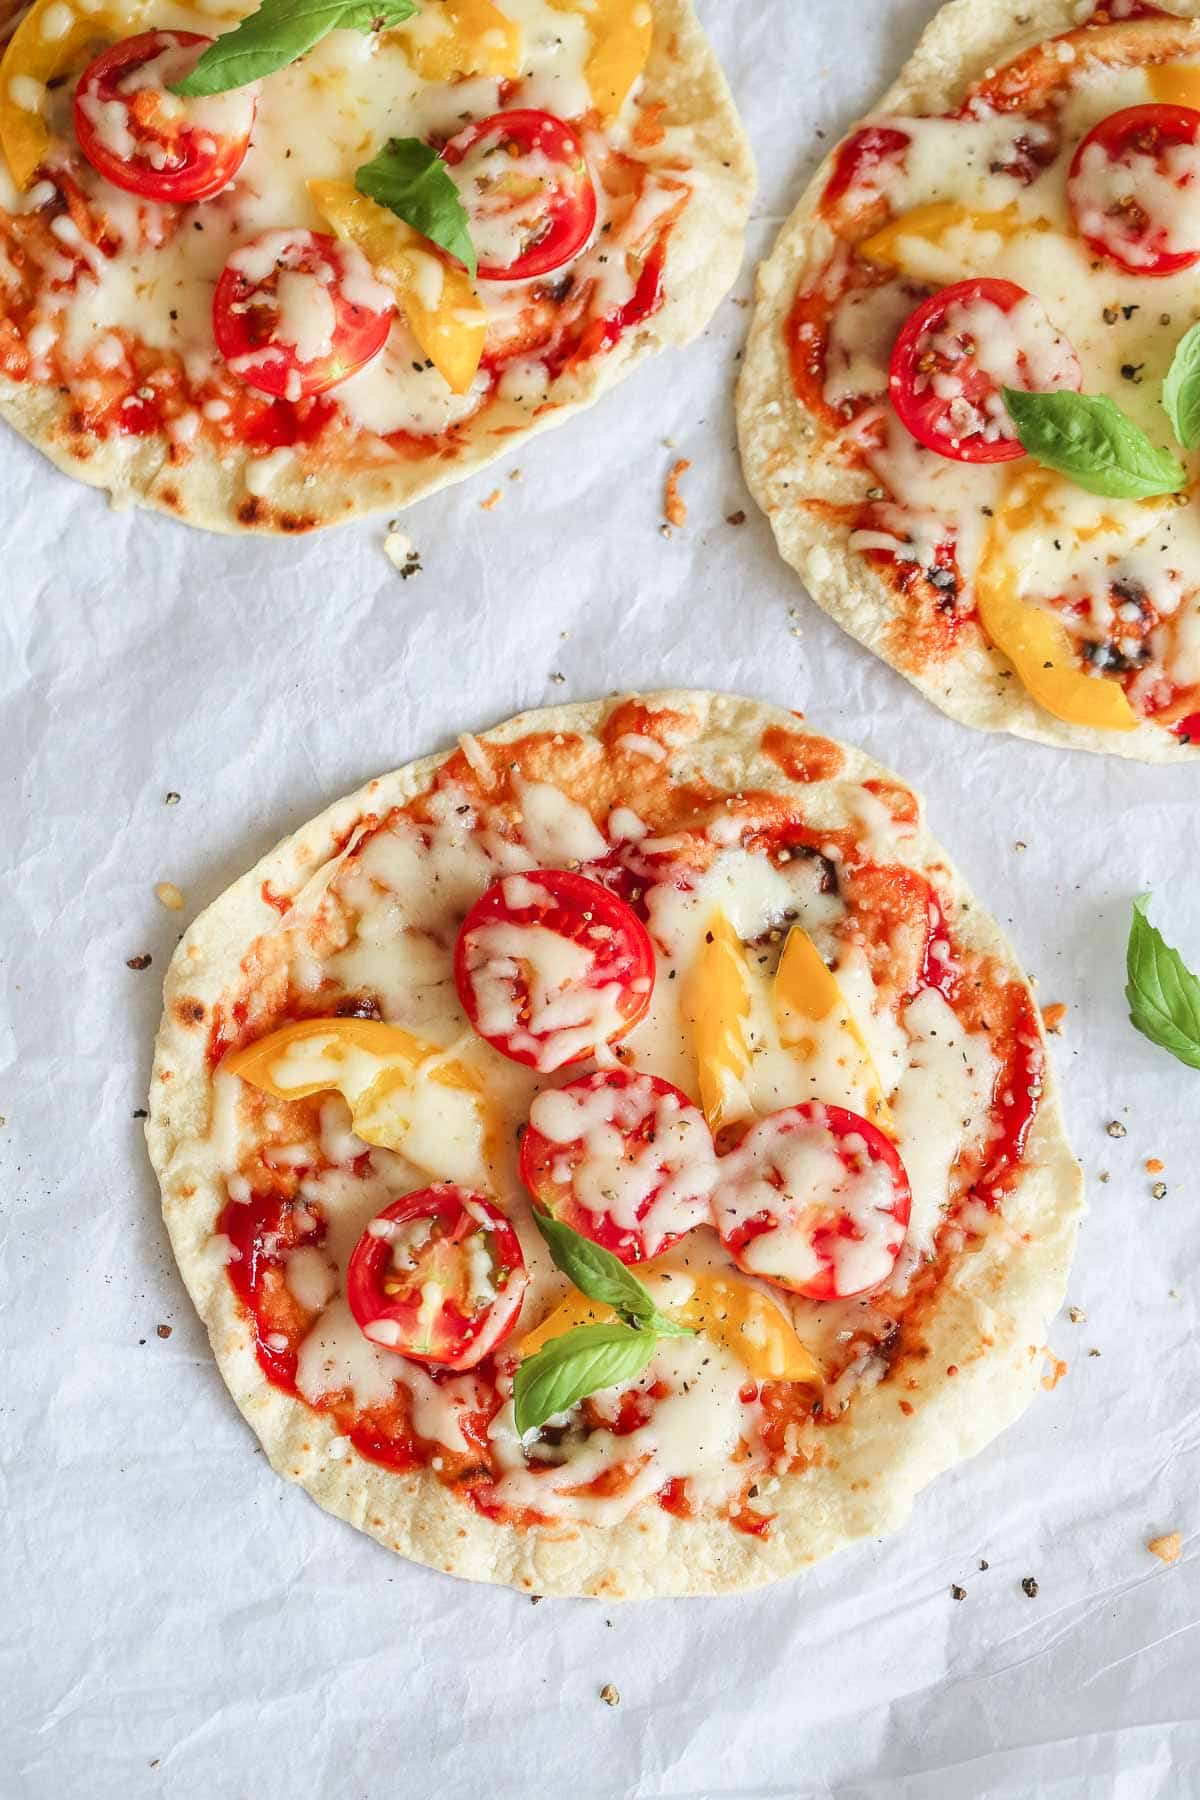 Easy 5-minute flatbread pizzas ready, laid on parchment paper